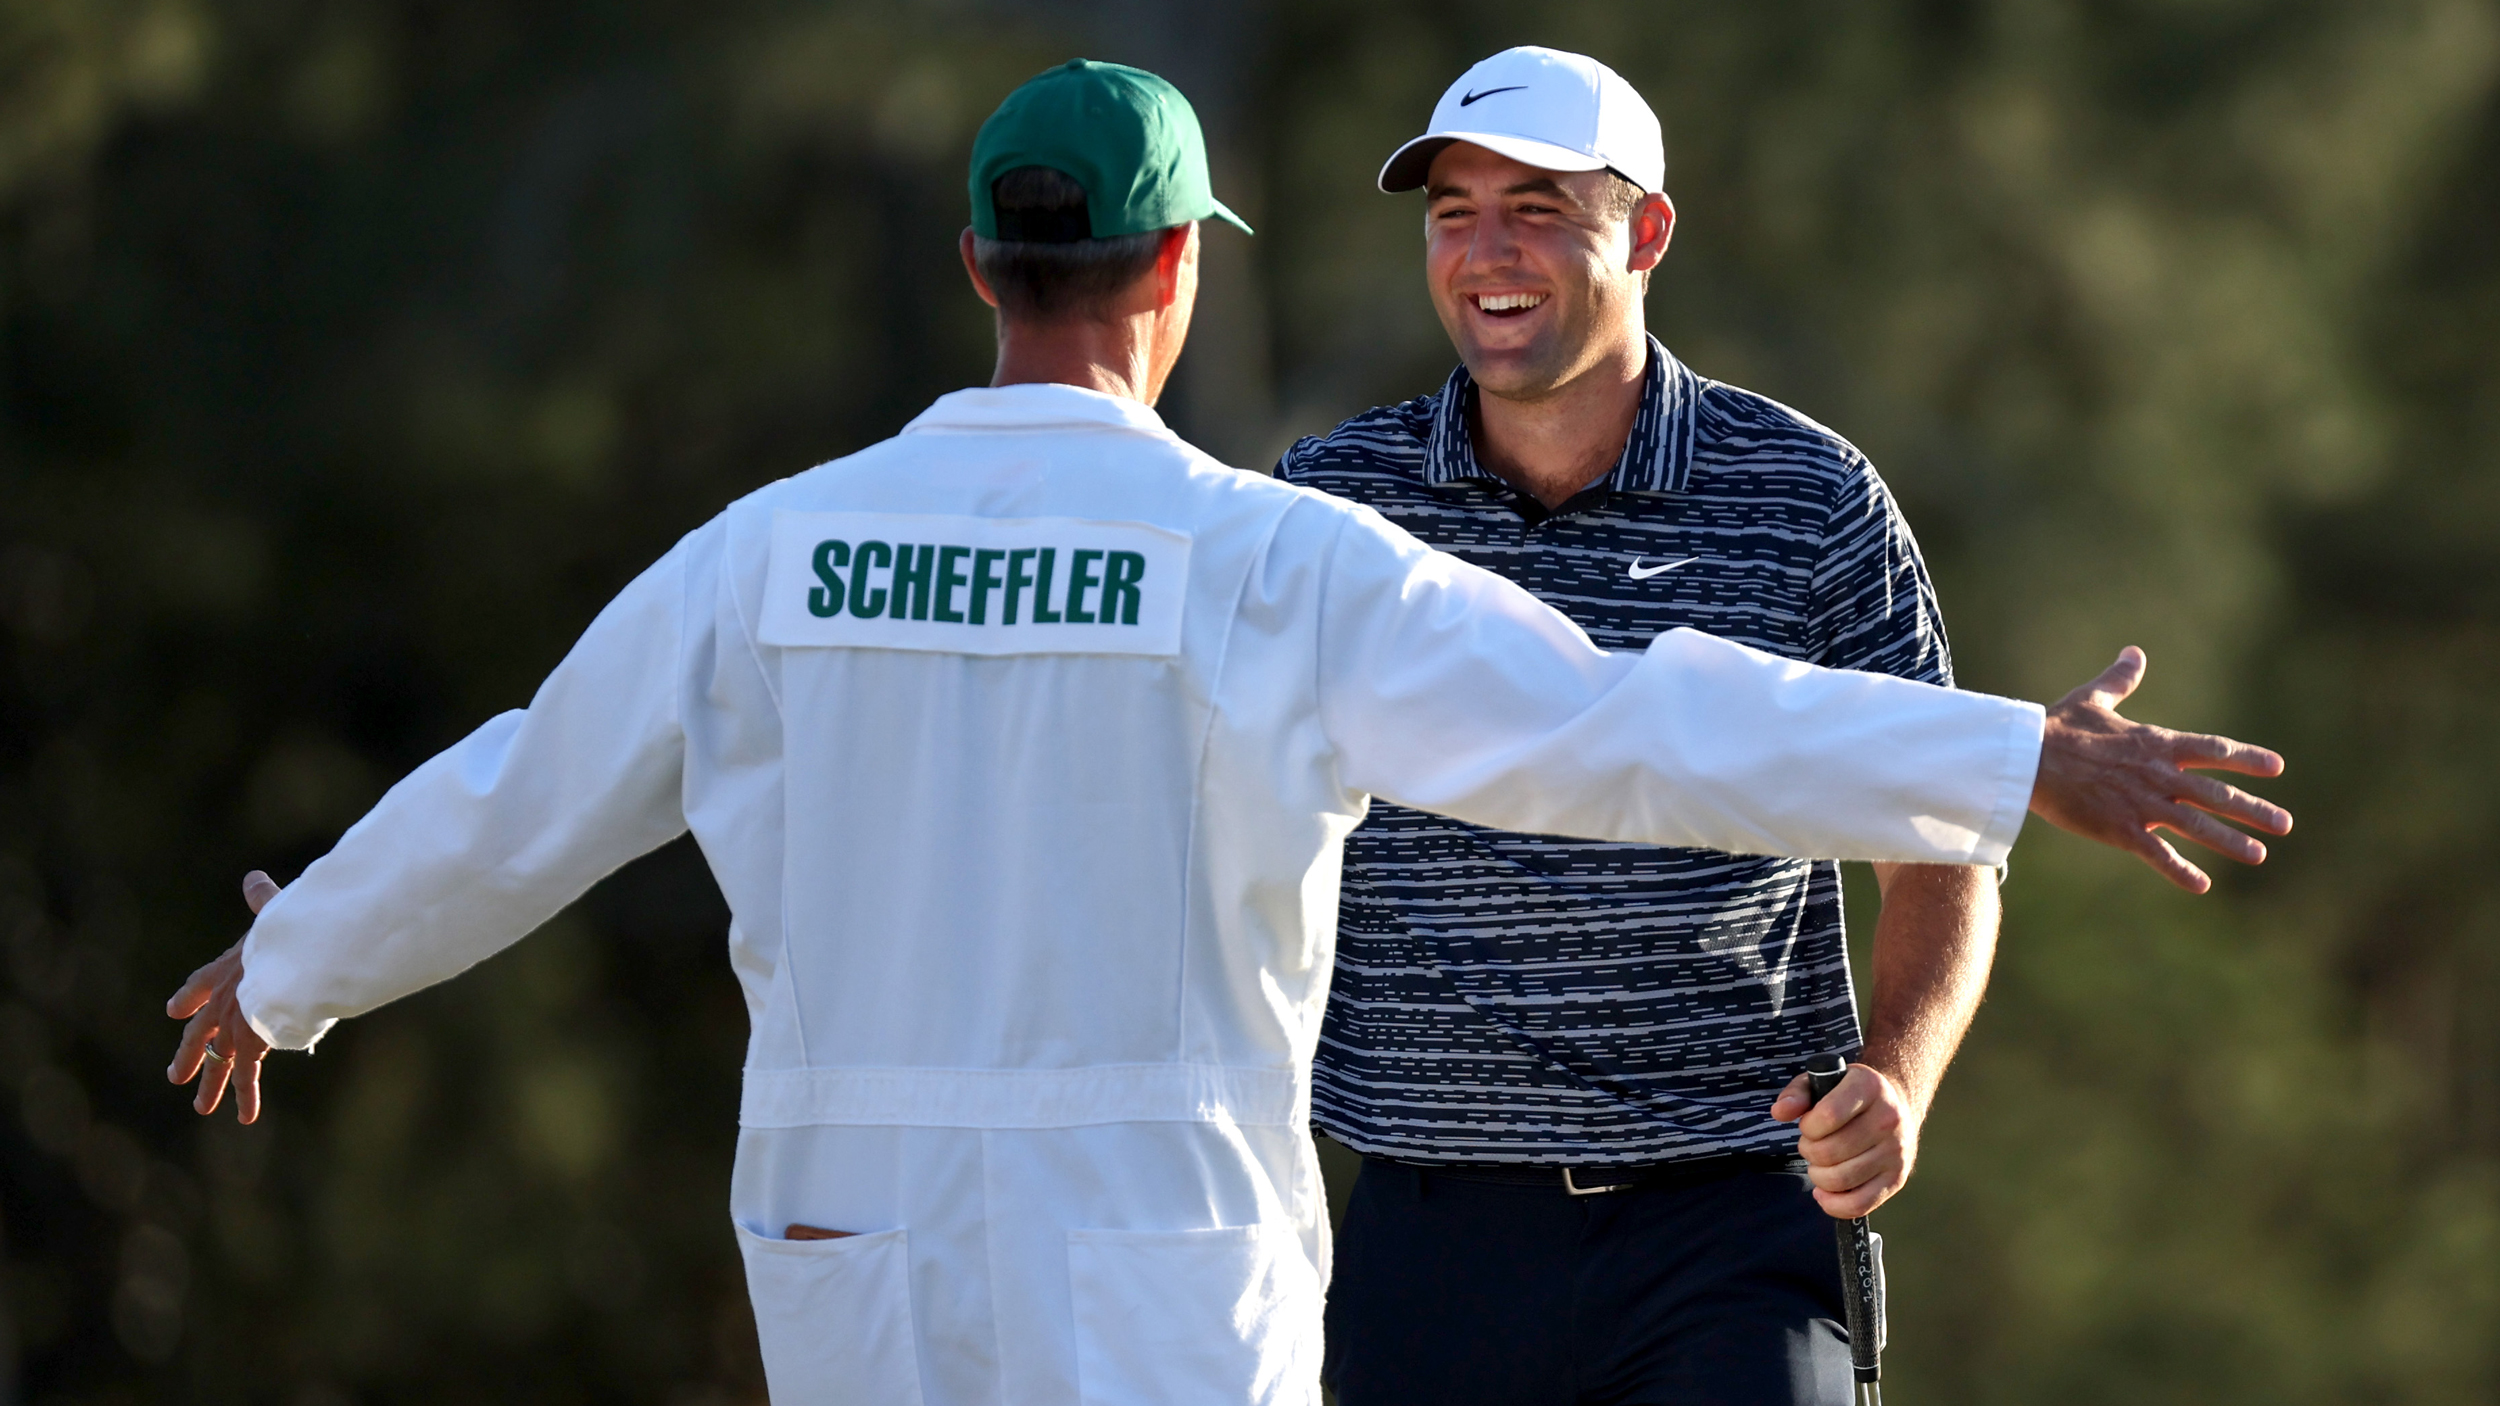 Why Do The Caddies Wear White Boiler Suits At The Masters? | Golf Monthly